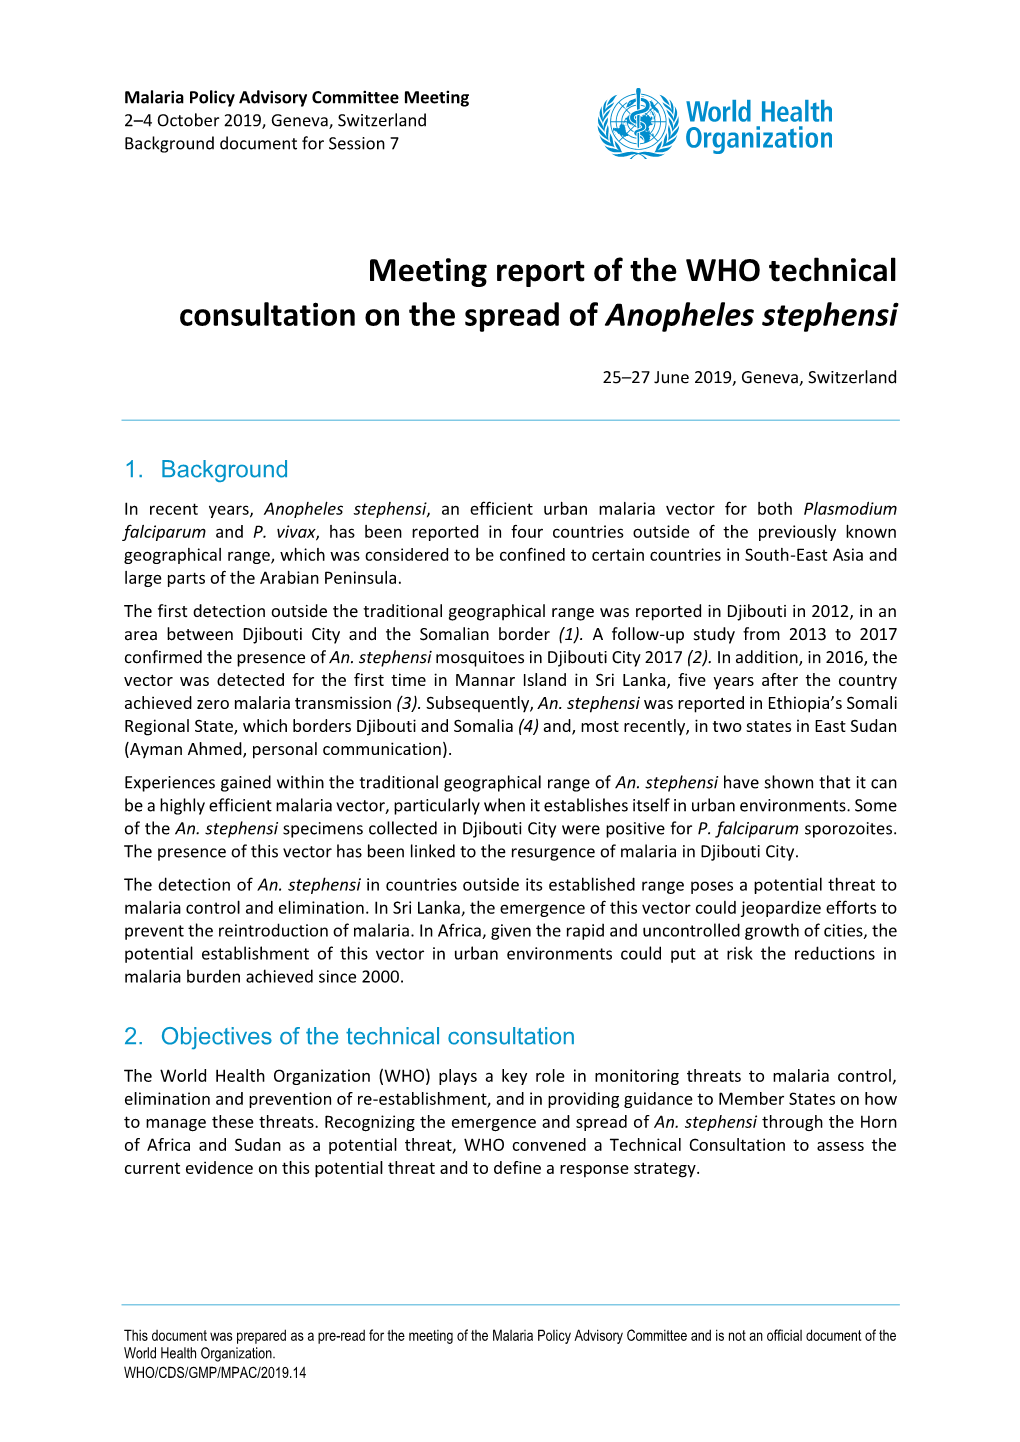 Meeting Report of the WHO Technical Consultation on the Spread of Anopheles Stephensi